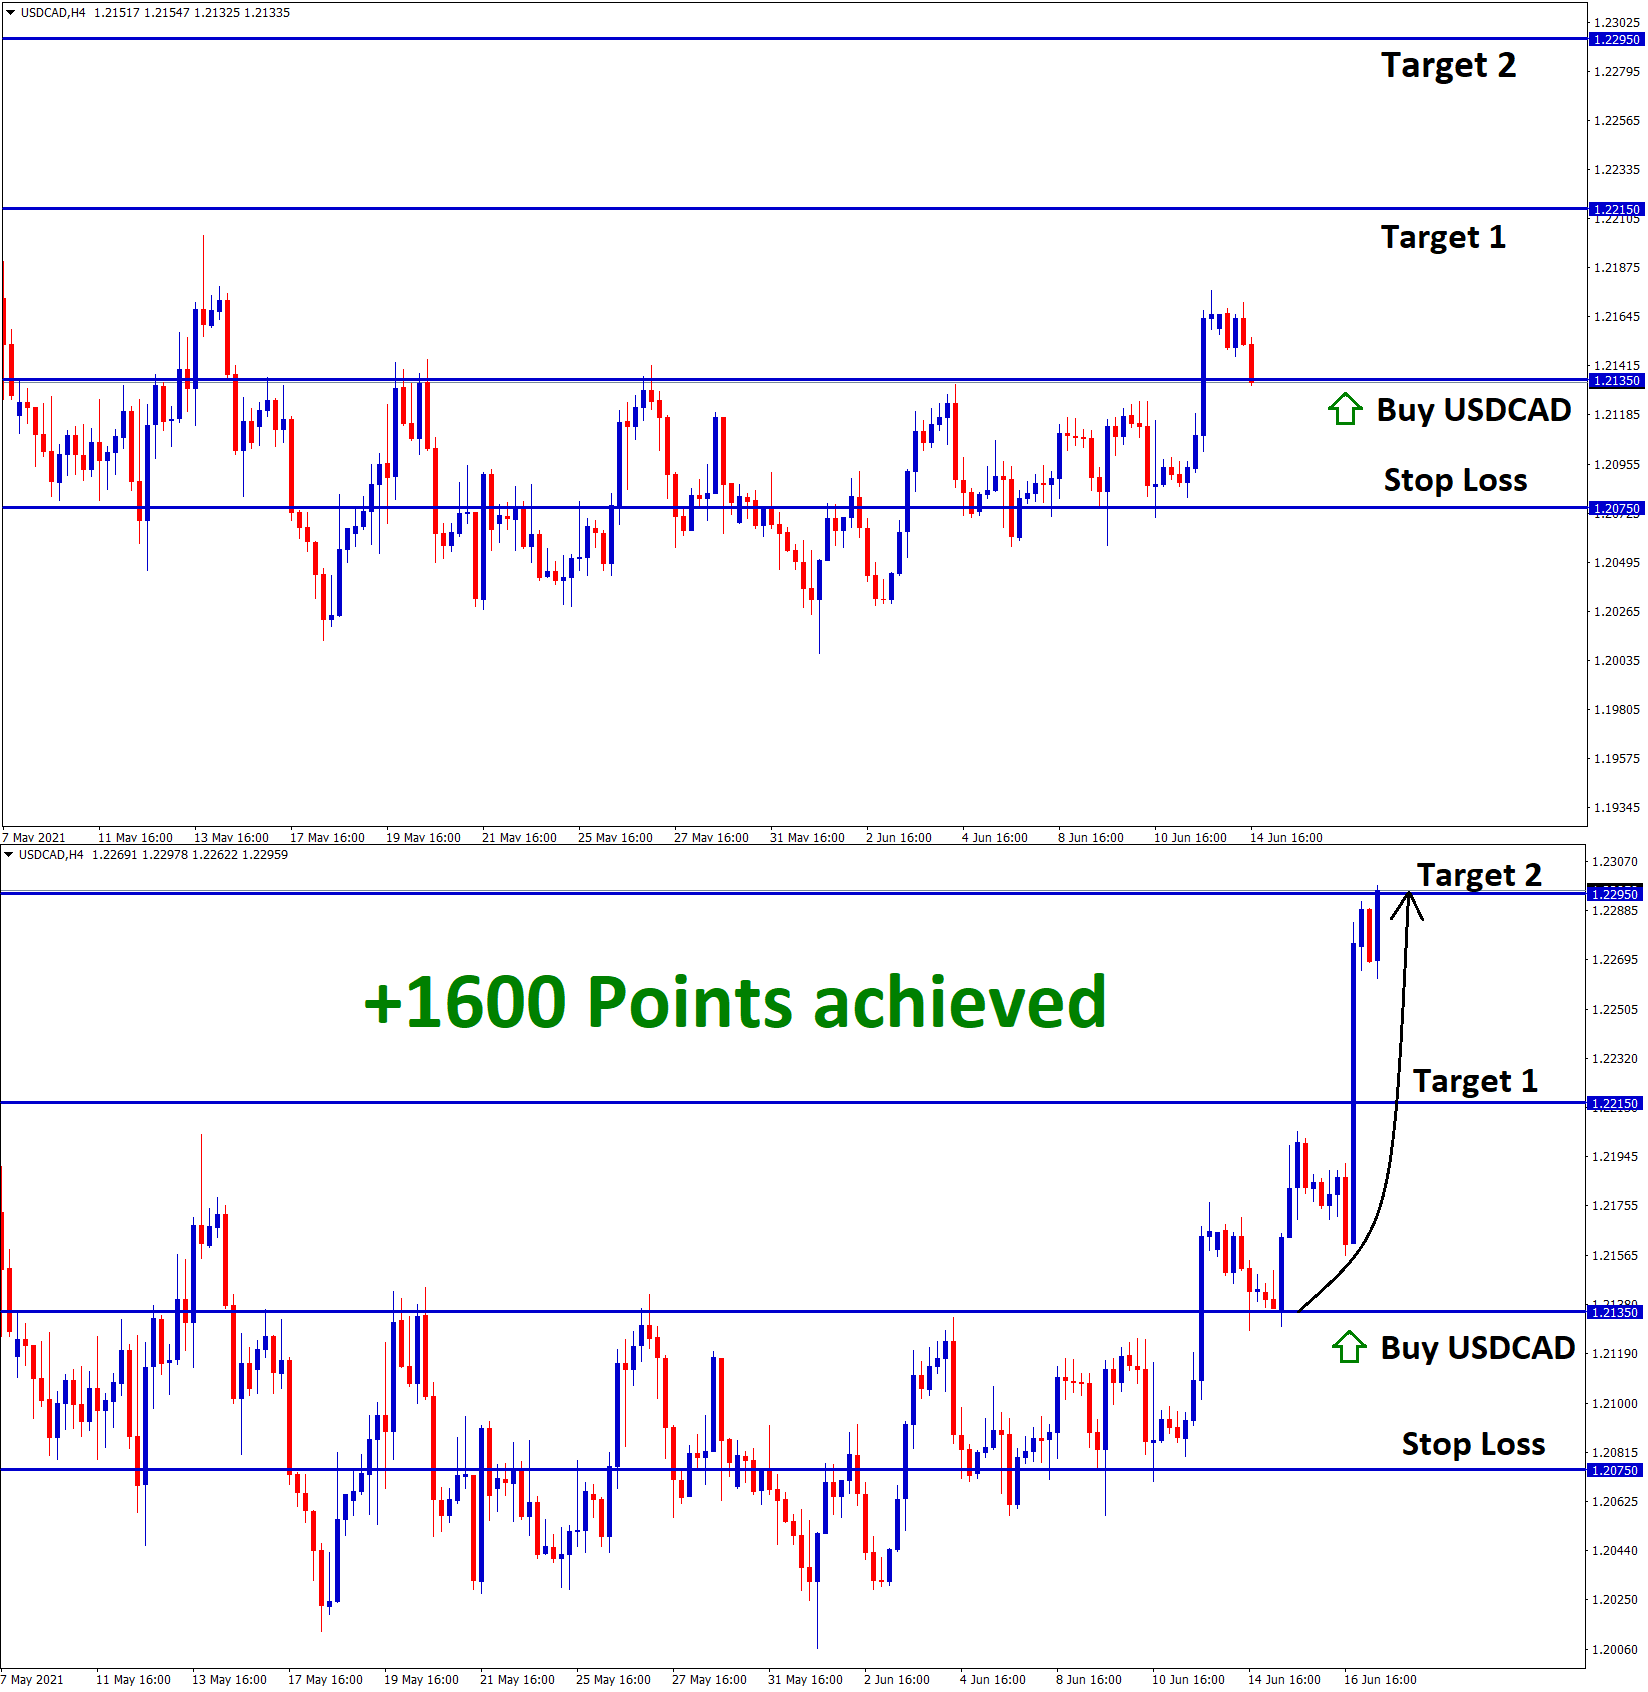 1600 ponts achieved in T2 USDCAD